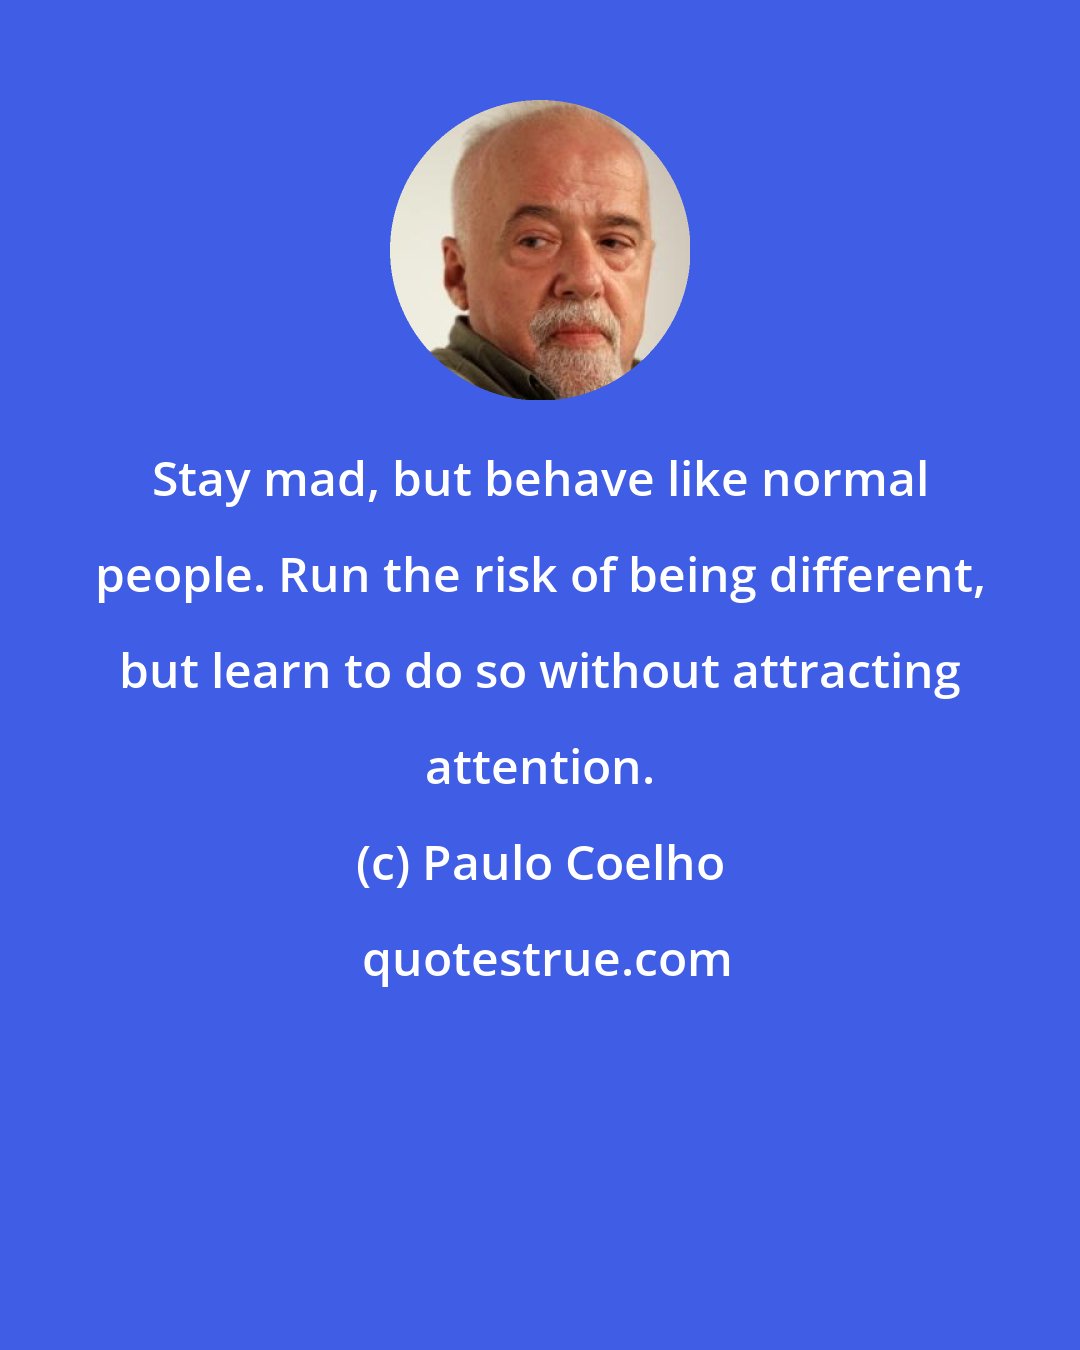 Paulo Coelho: Stay mad, but behave like normal people. Run the risk of being different, but learn to do so without attracting attention.